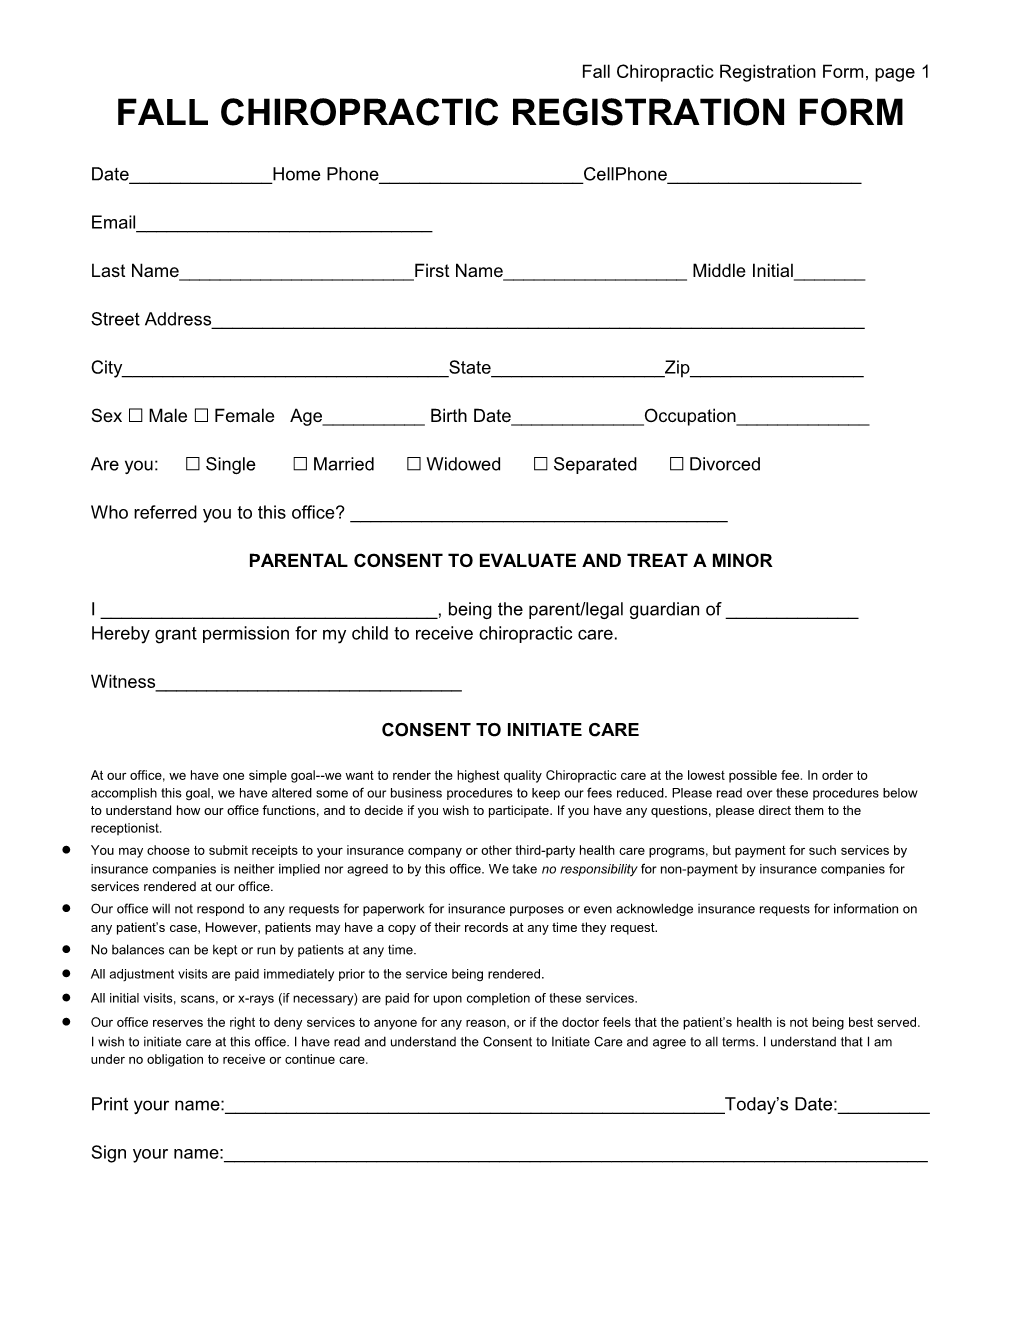 Fall Chiropractic Registration Form, Page 1